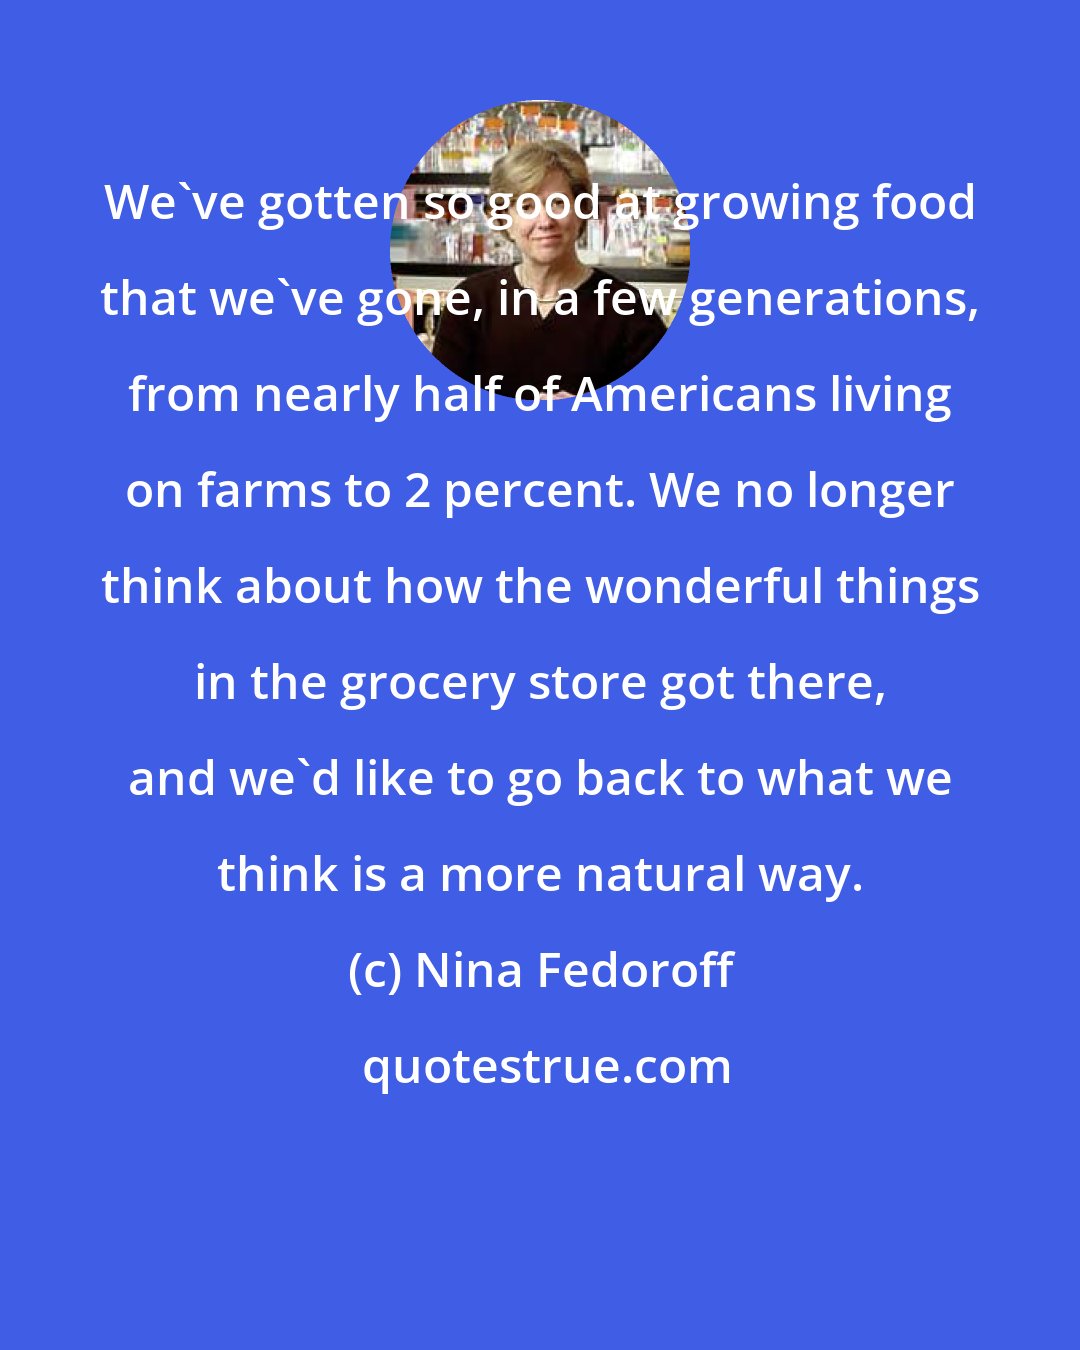 Nina Fedoroff: We've gotten so good at growing food that we've gone, in a few generations, from nearly half of Americans living on farms to 2 percent. We no longer think about how the wonderful things in the grocery store got there, and we'd like to go back to what we think is a more natural way.